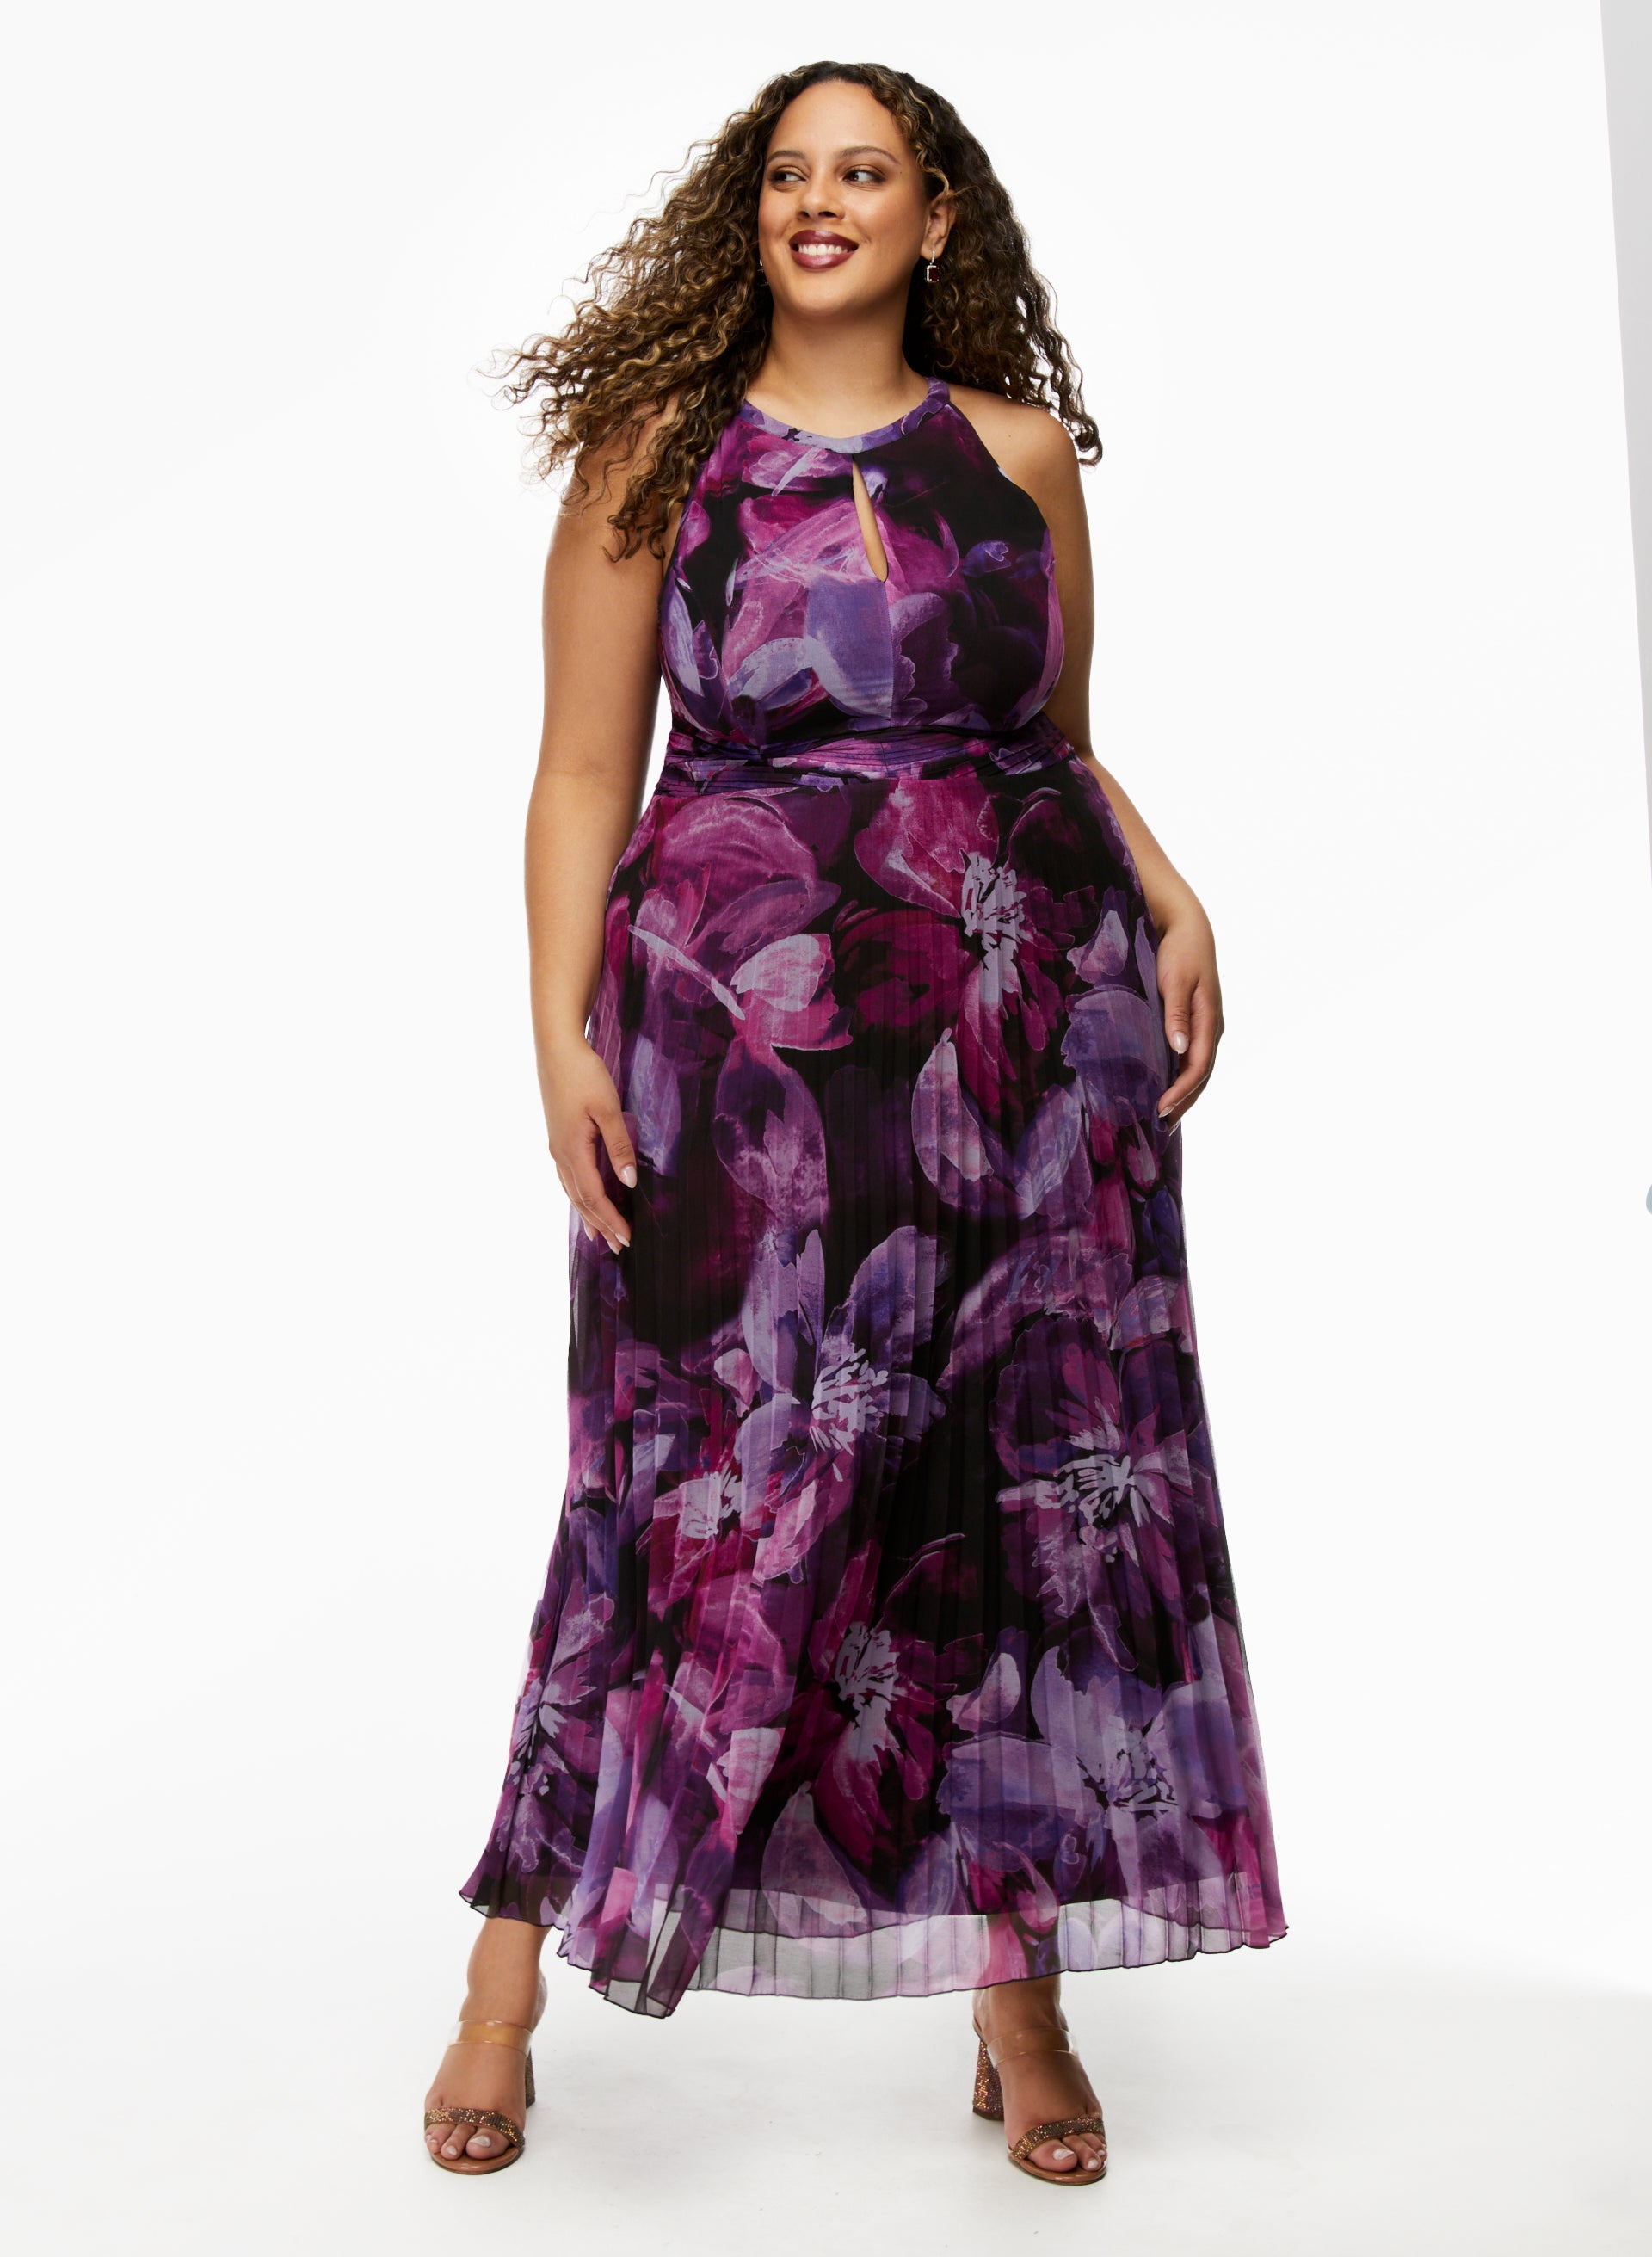 Plus Size Halter Dress - Fast Shipping Here - Chic Lover